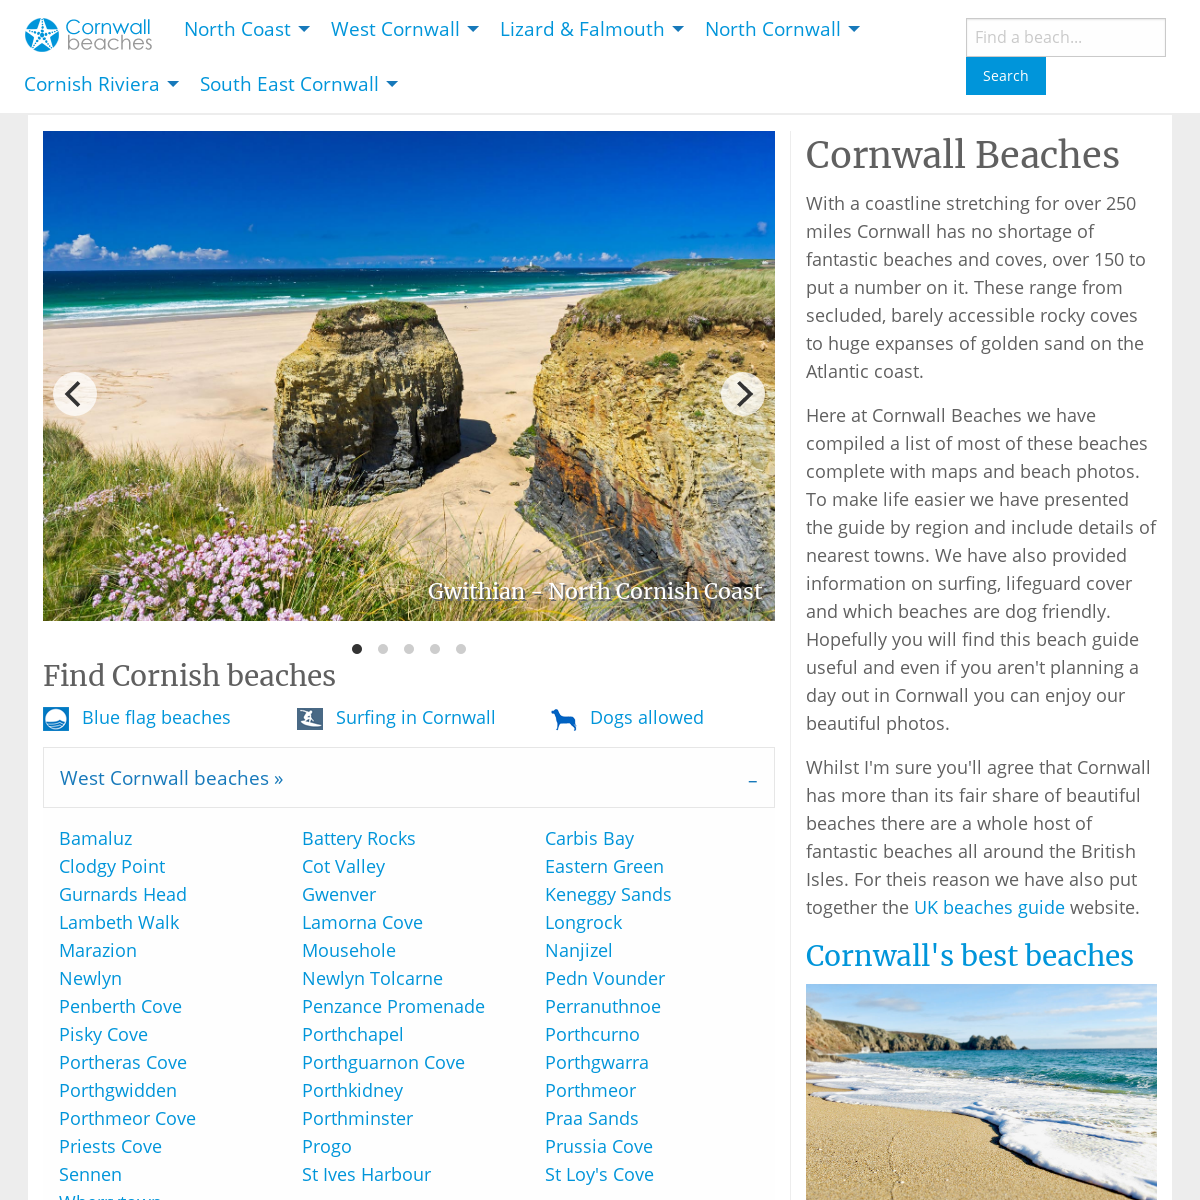 A complete backup of cornwall-beaches.co.uk